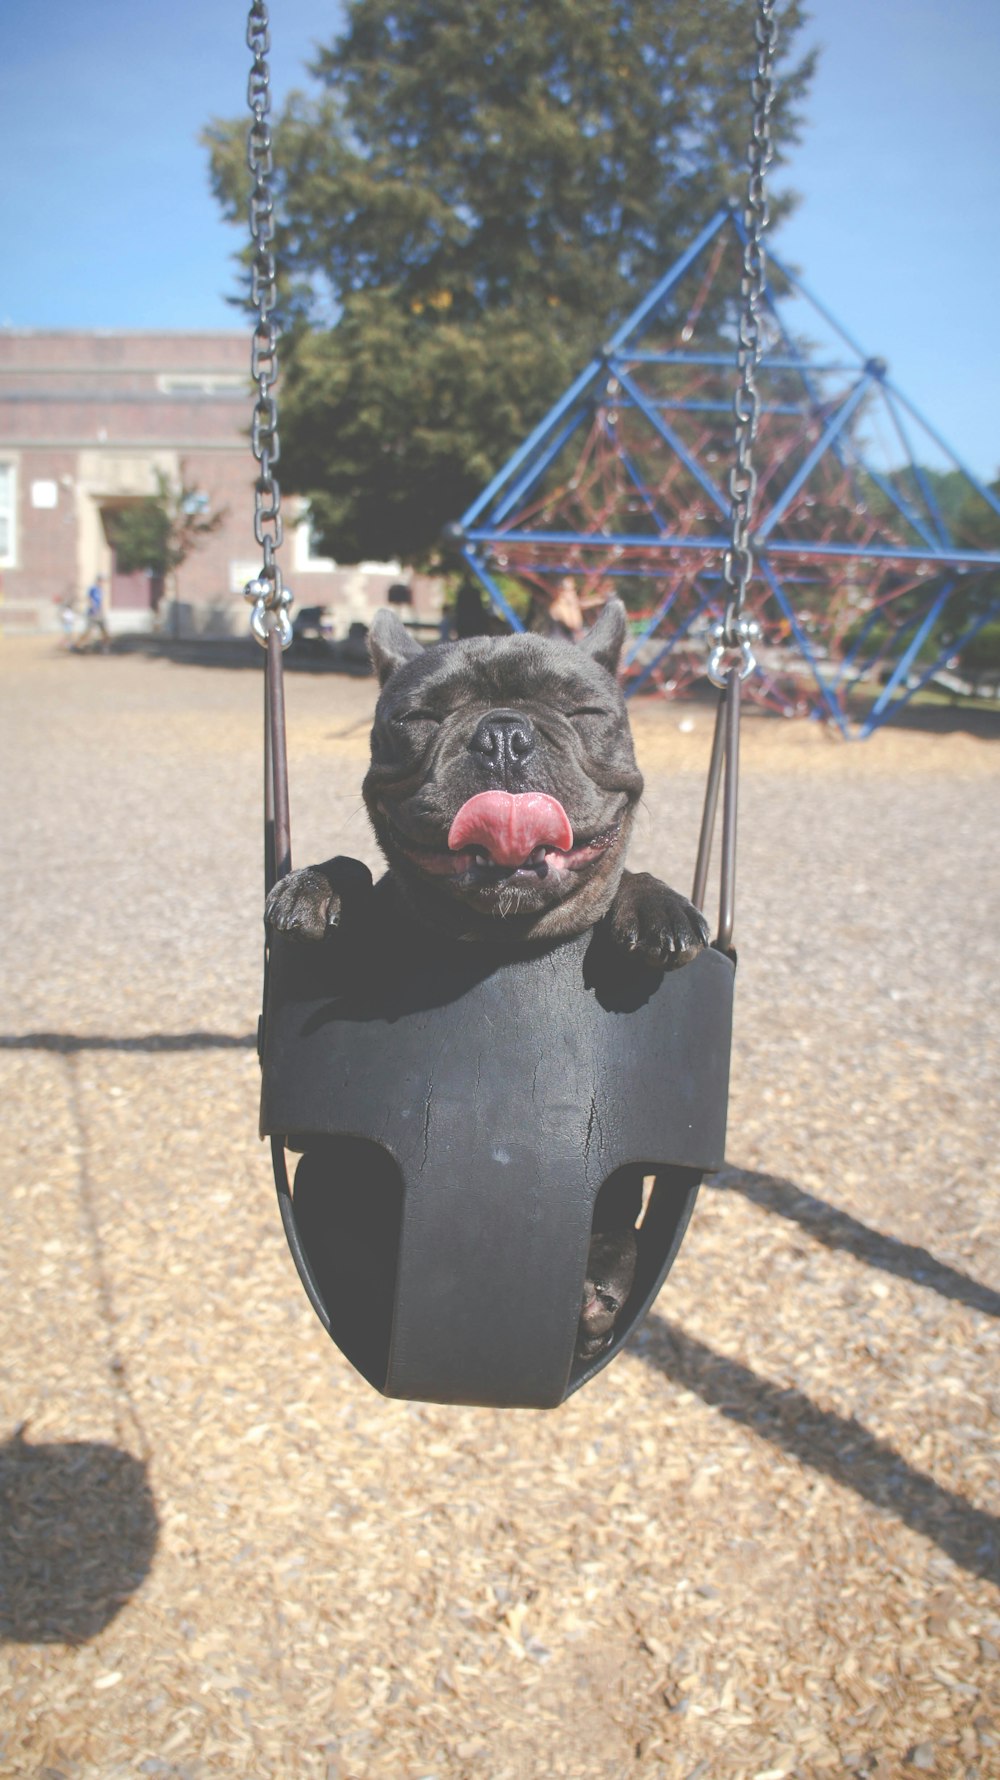 Dog sways in a child seat on a swing set